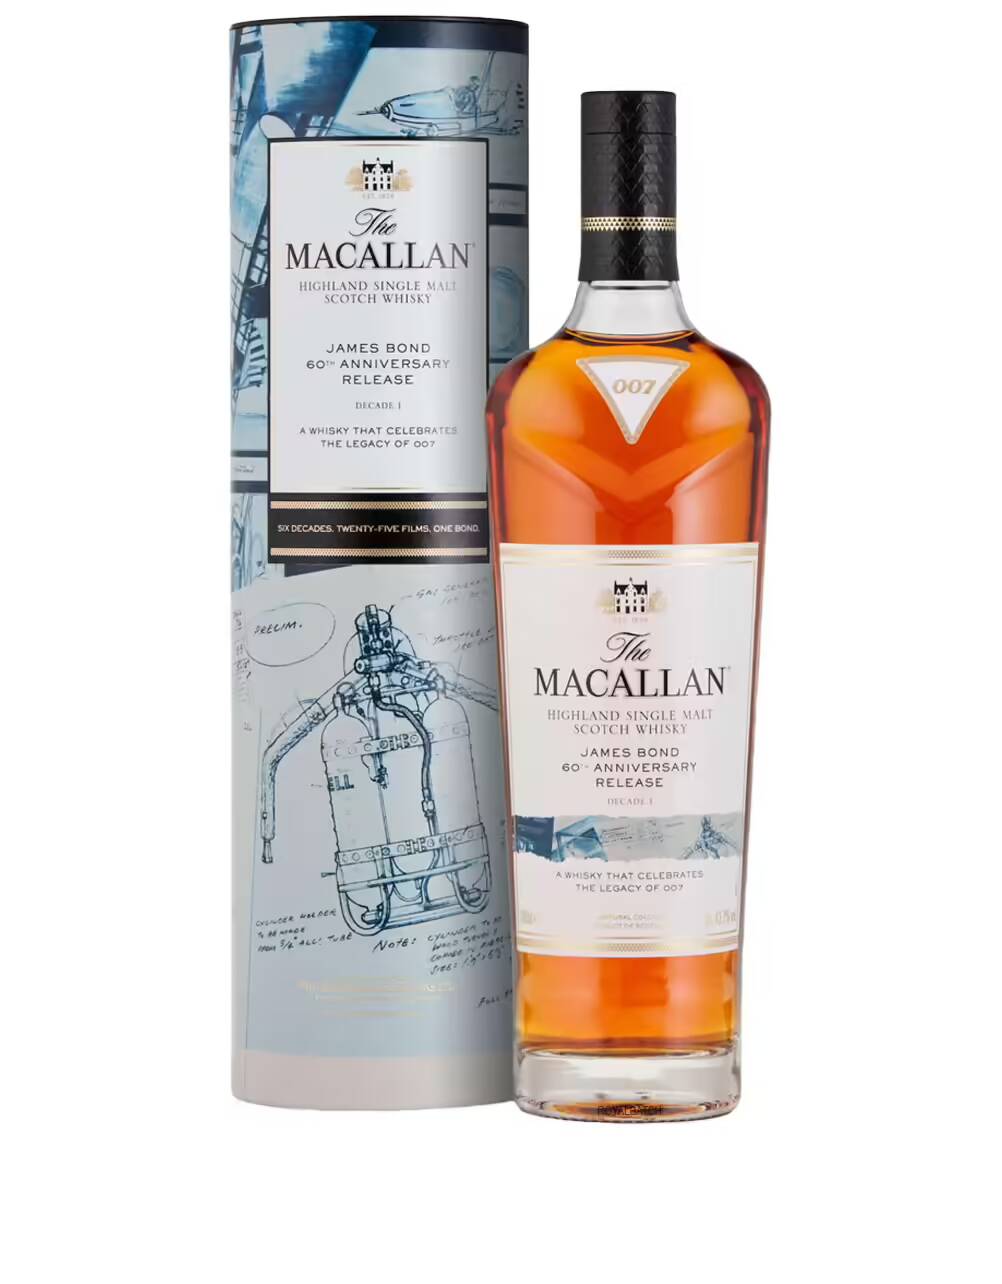 The Macallan James Bond 60th Anniversary Release Decade I Edition Scotch Whisky